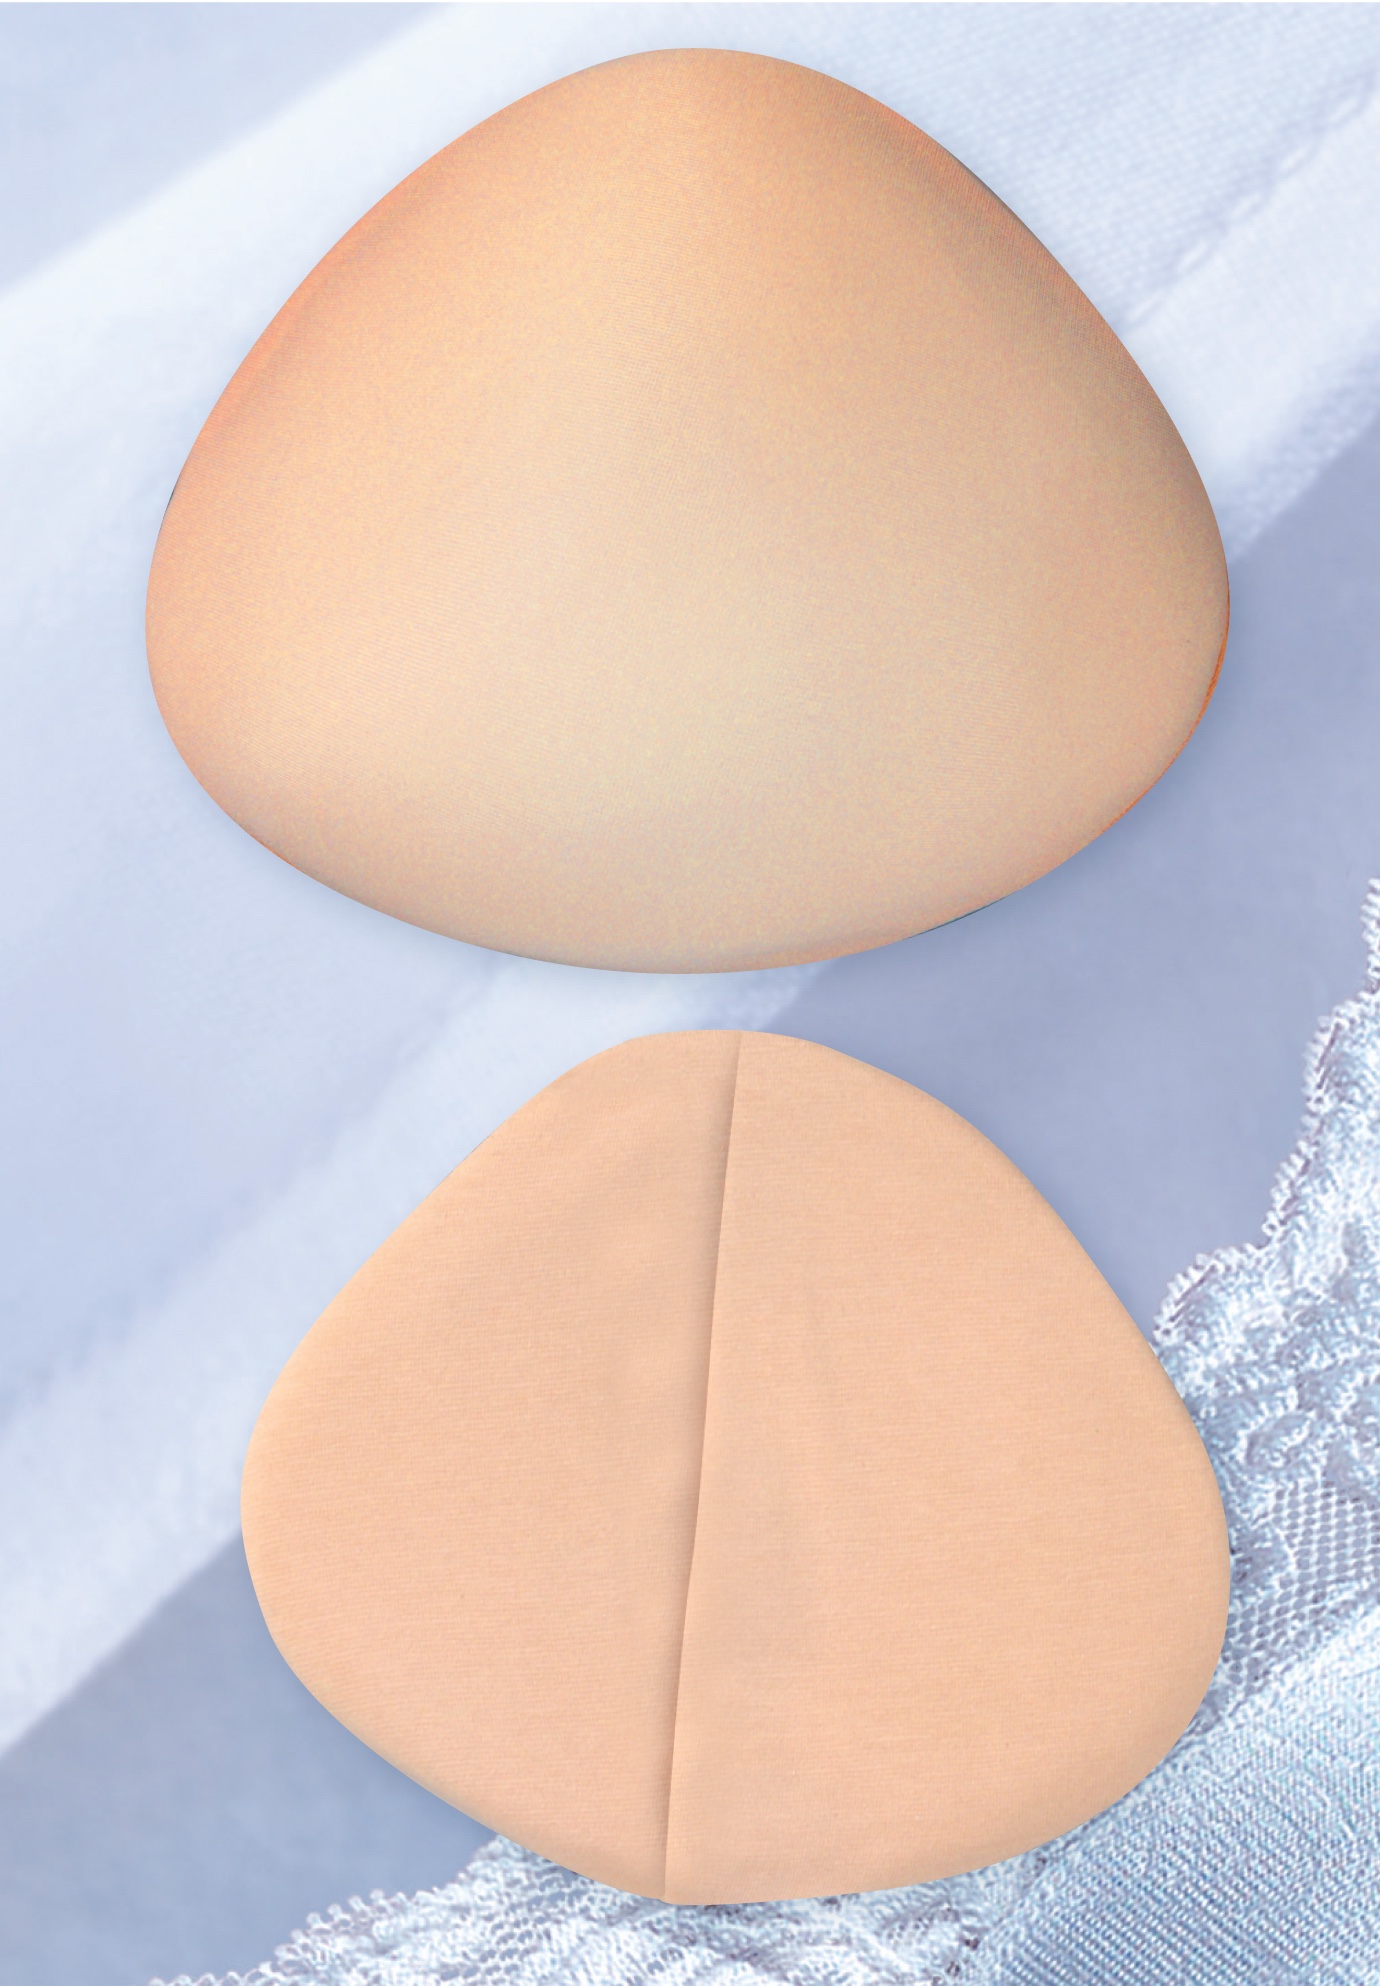 How To Wear Silicone Breast Forms